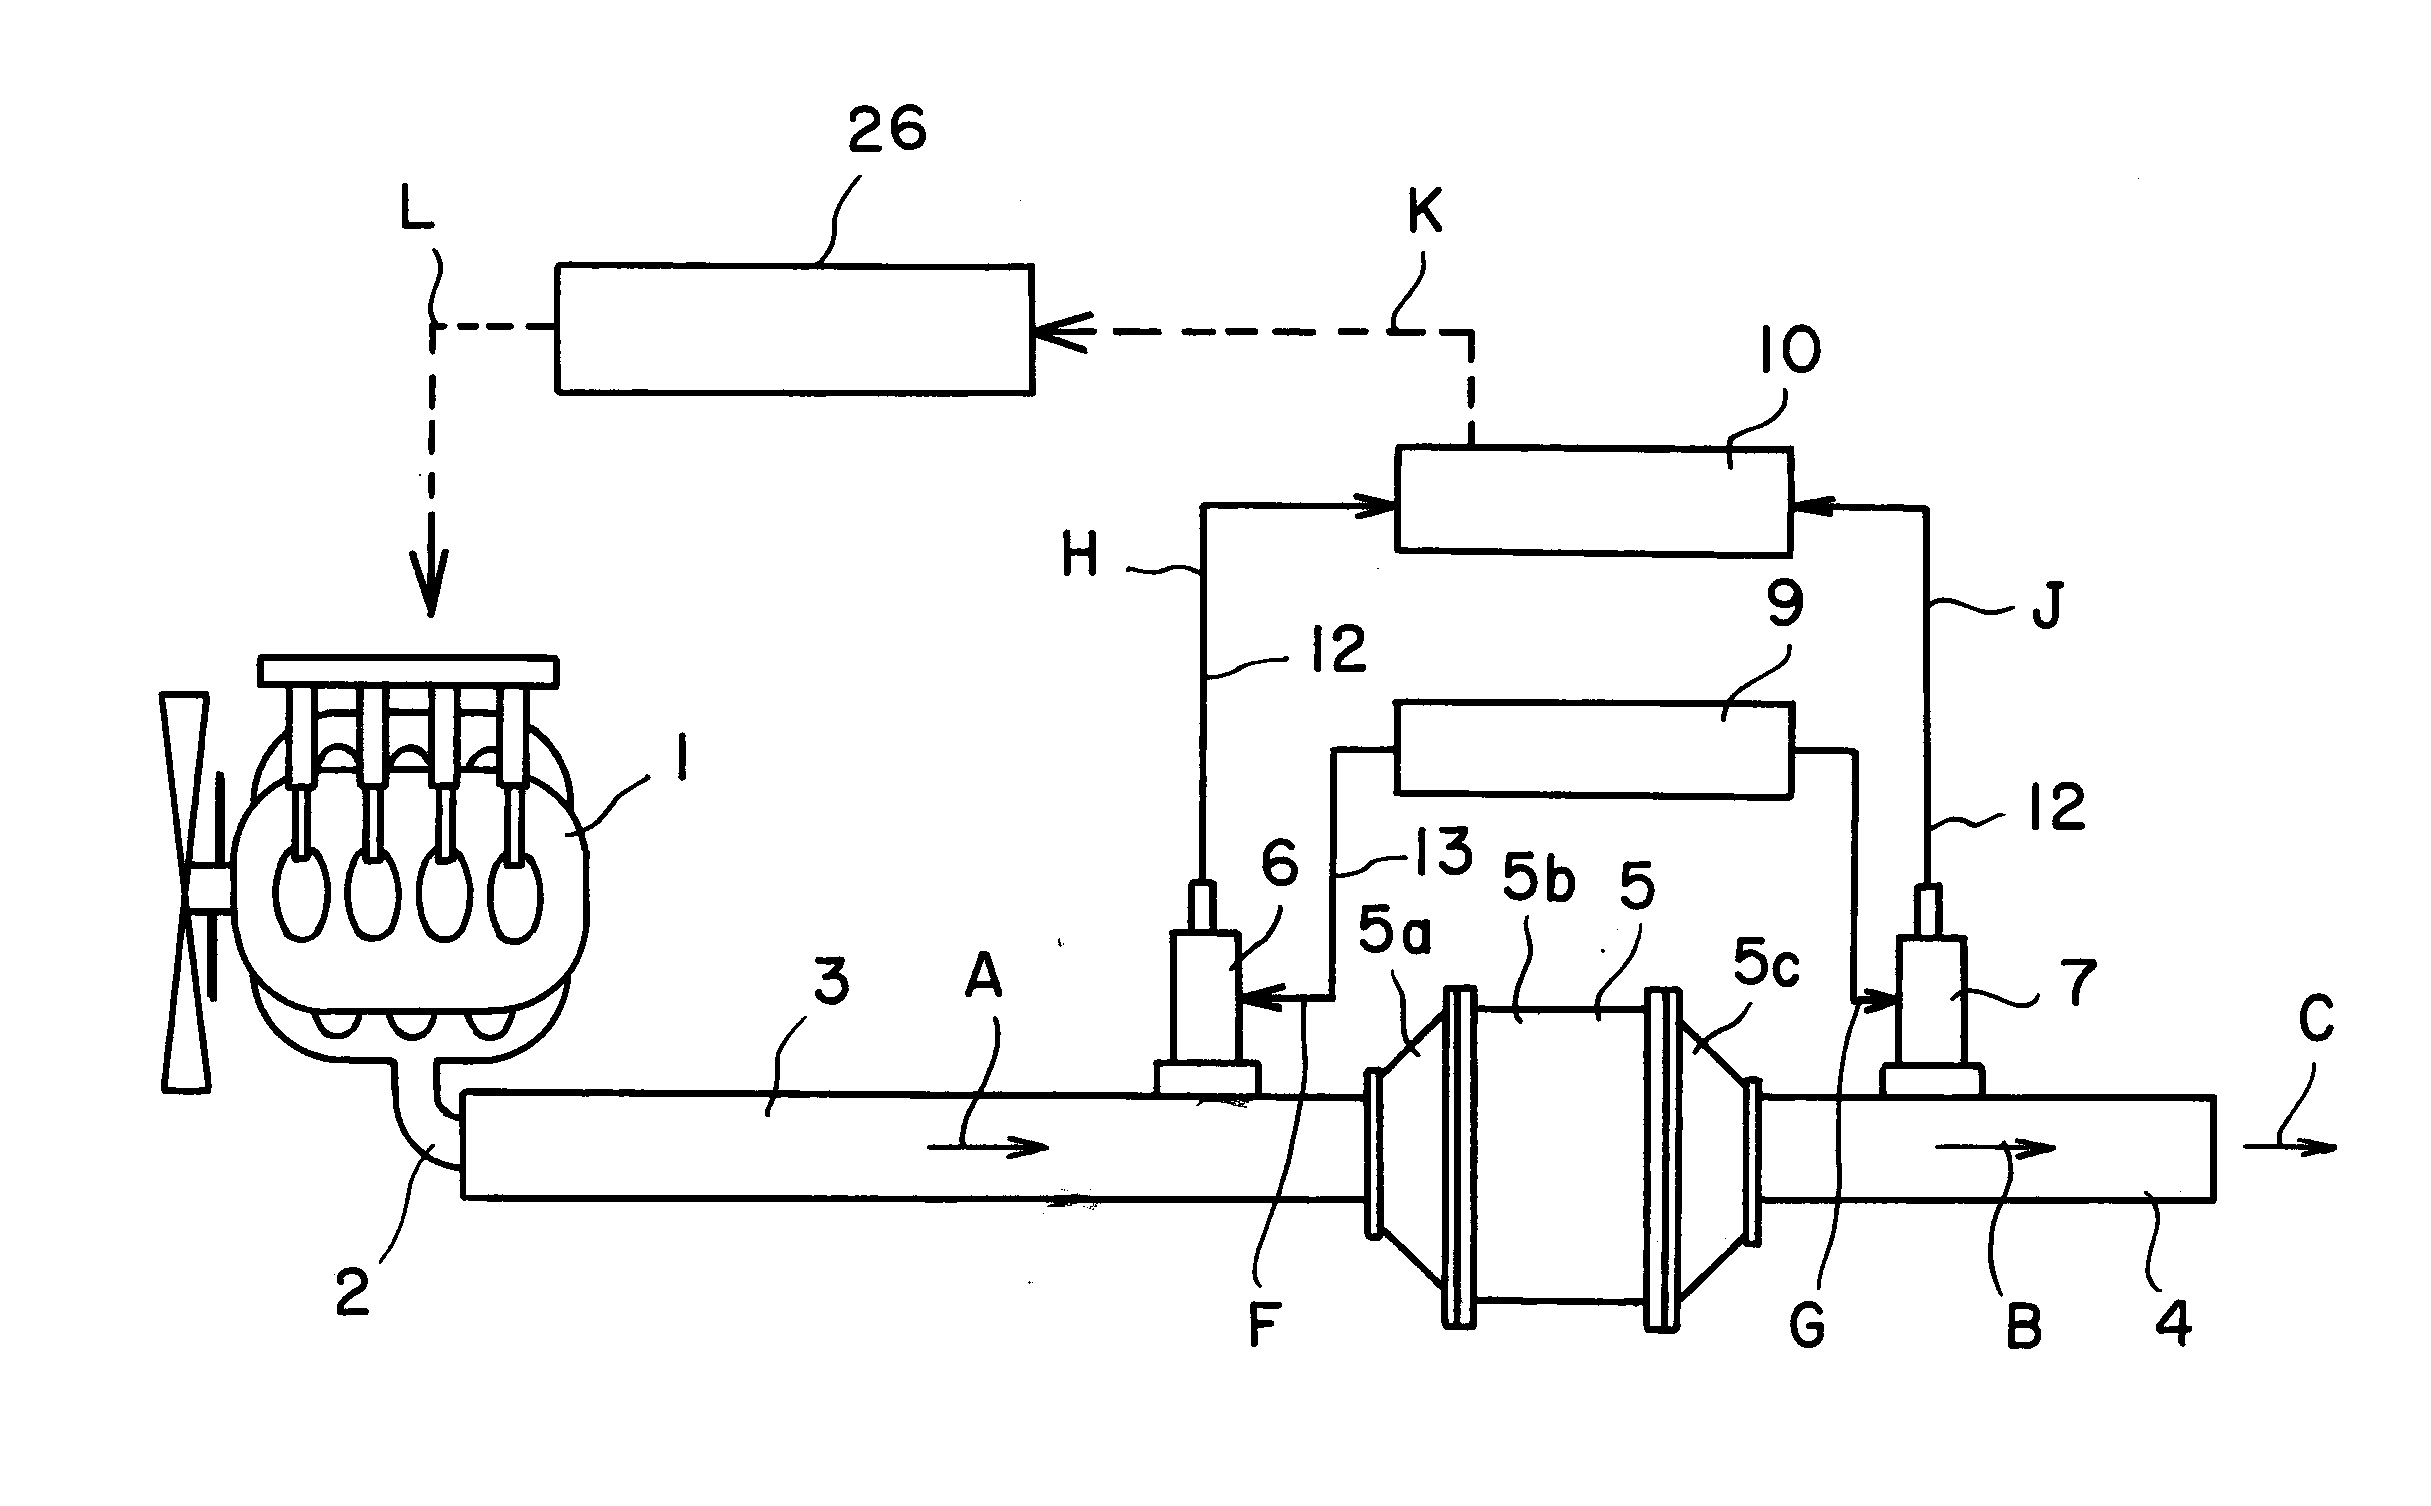 Devices for detecting accumulation amount of particulates